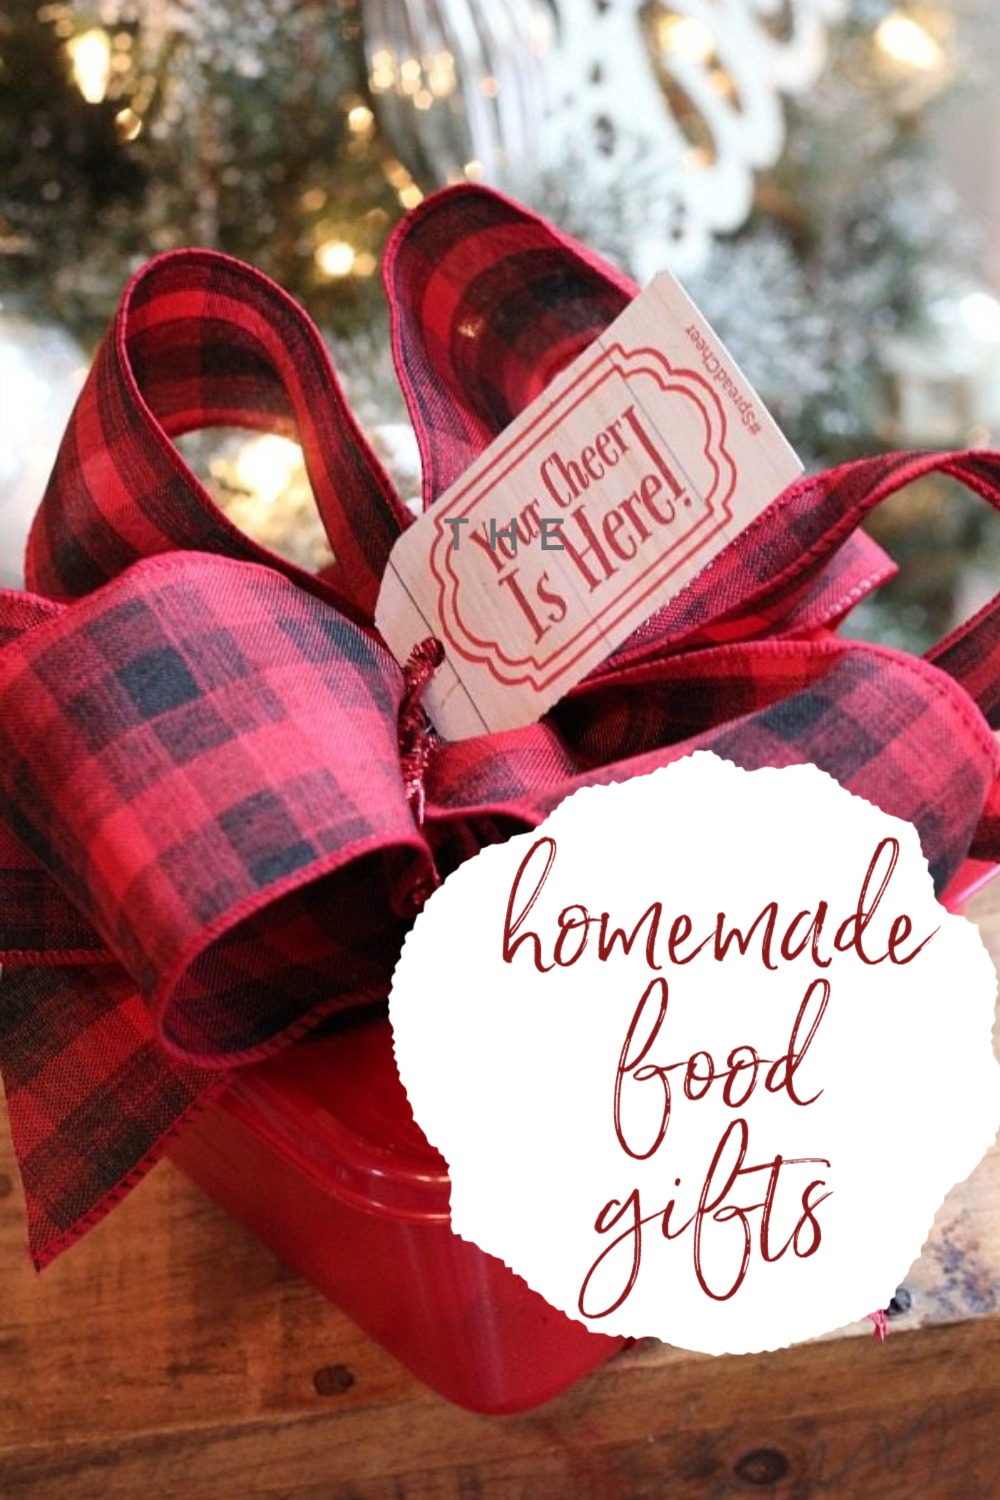 The best holiday homemade food gift ideas!